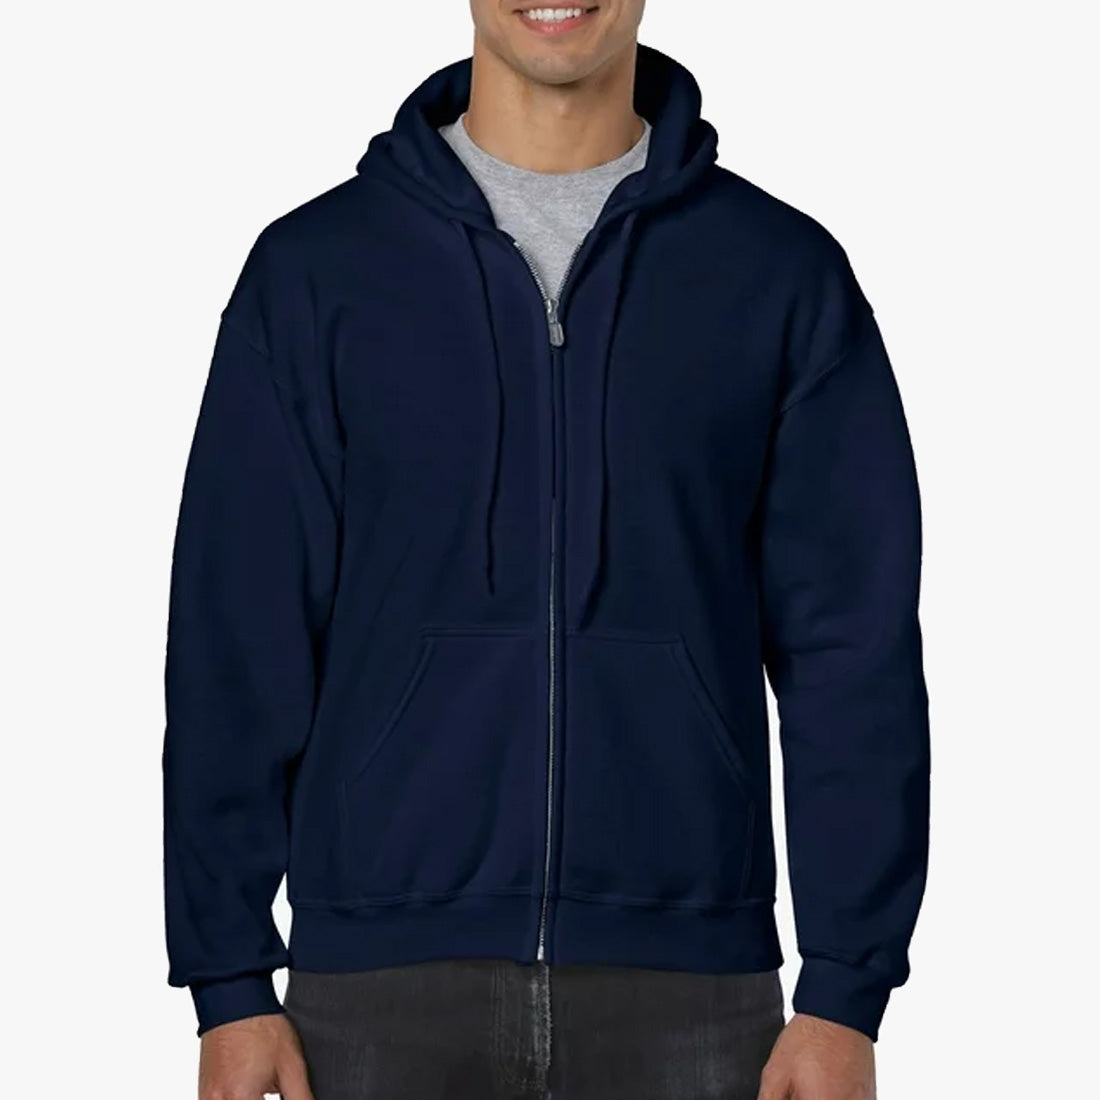 UNITED TEXTILE HIGH-QUALITY FULL ZIP UP HOODIES - 4943